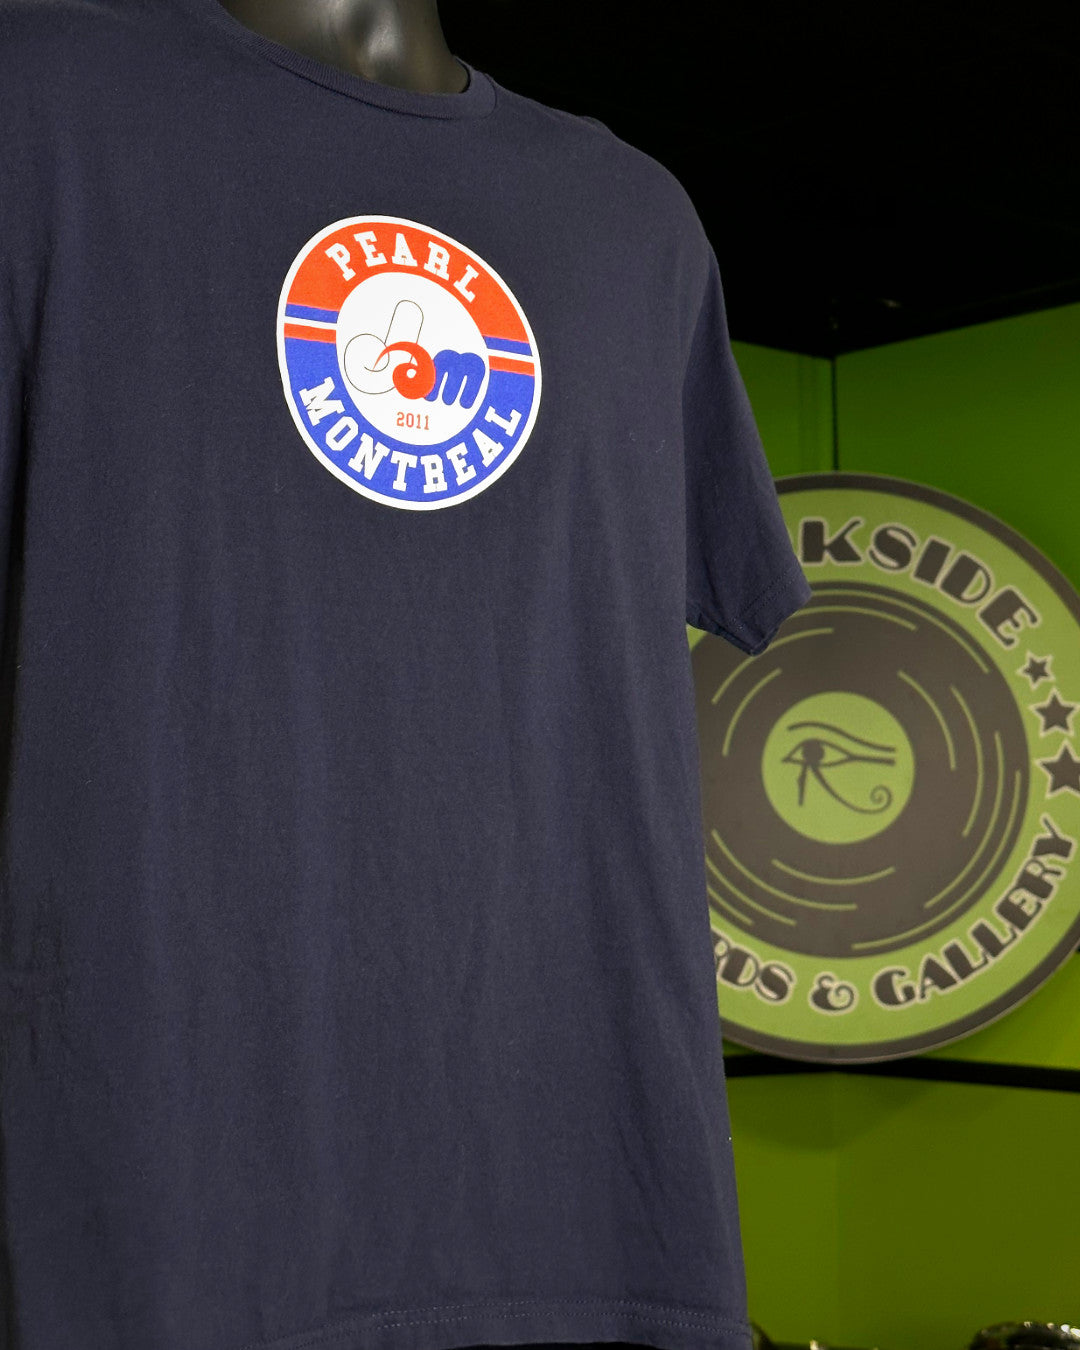 Pearl Jam 2011 Montreal Expos Logo T-Shirt, Navy Blue, L (Tag Ripped, Tear At The Seam) - Darkside Records